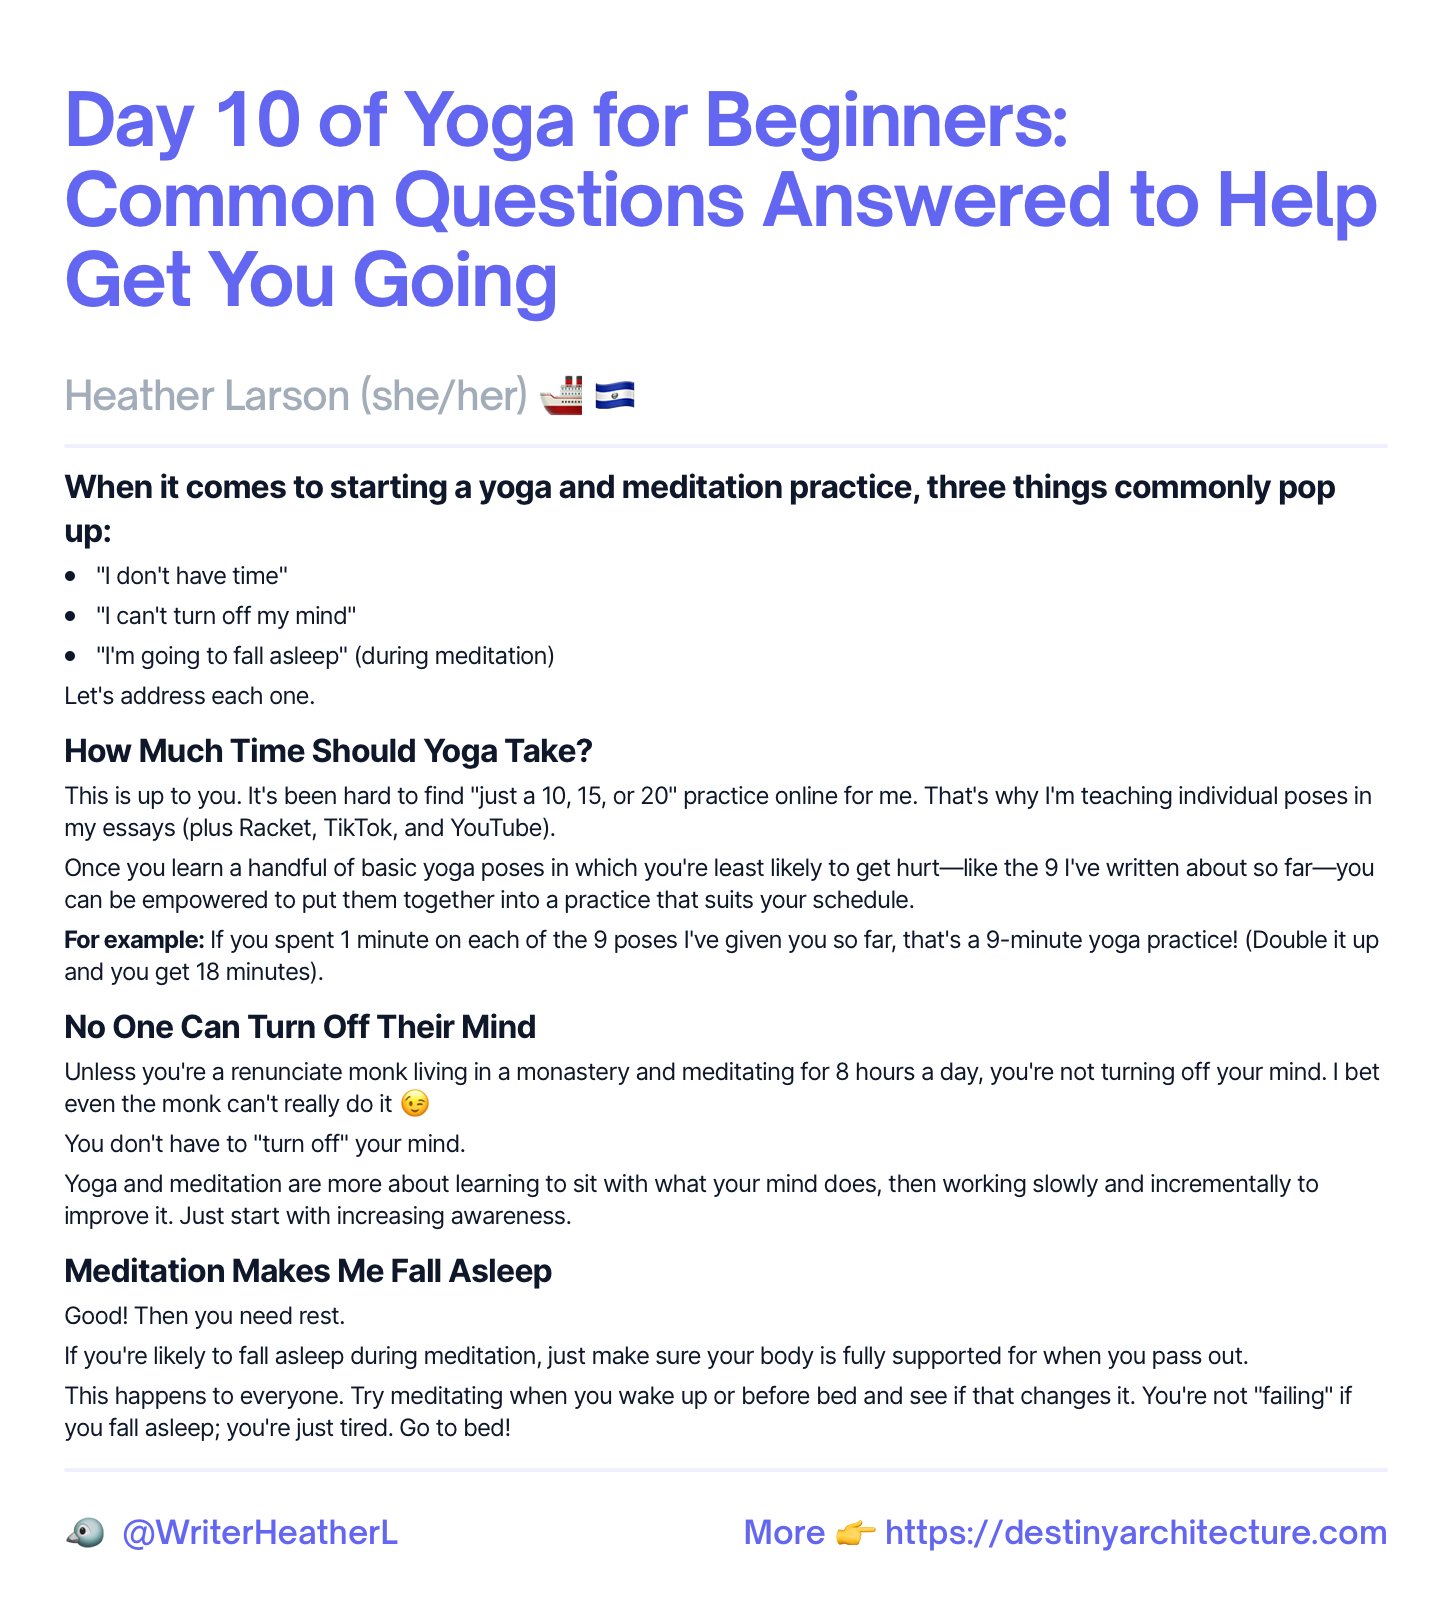 Day 10 of Yoga for Beginners: Common Questions Answered to Help Get You Going